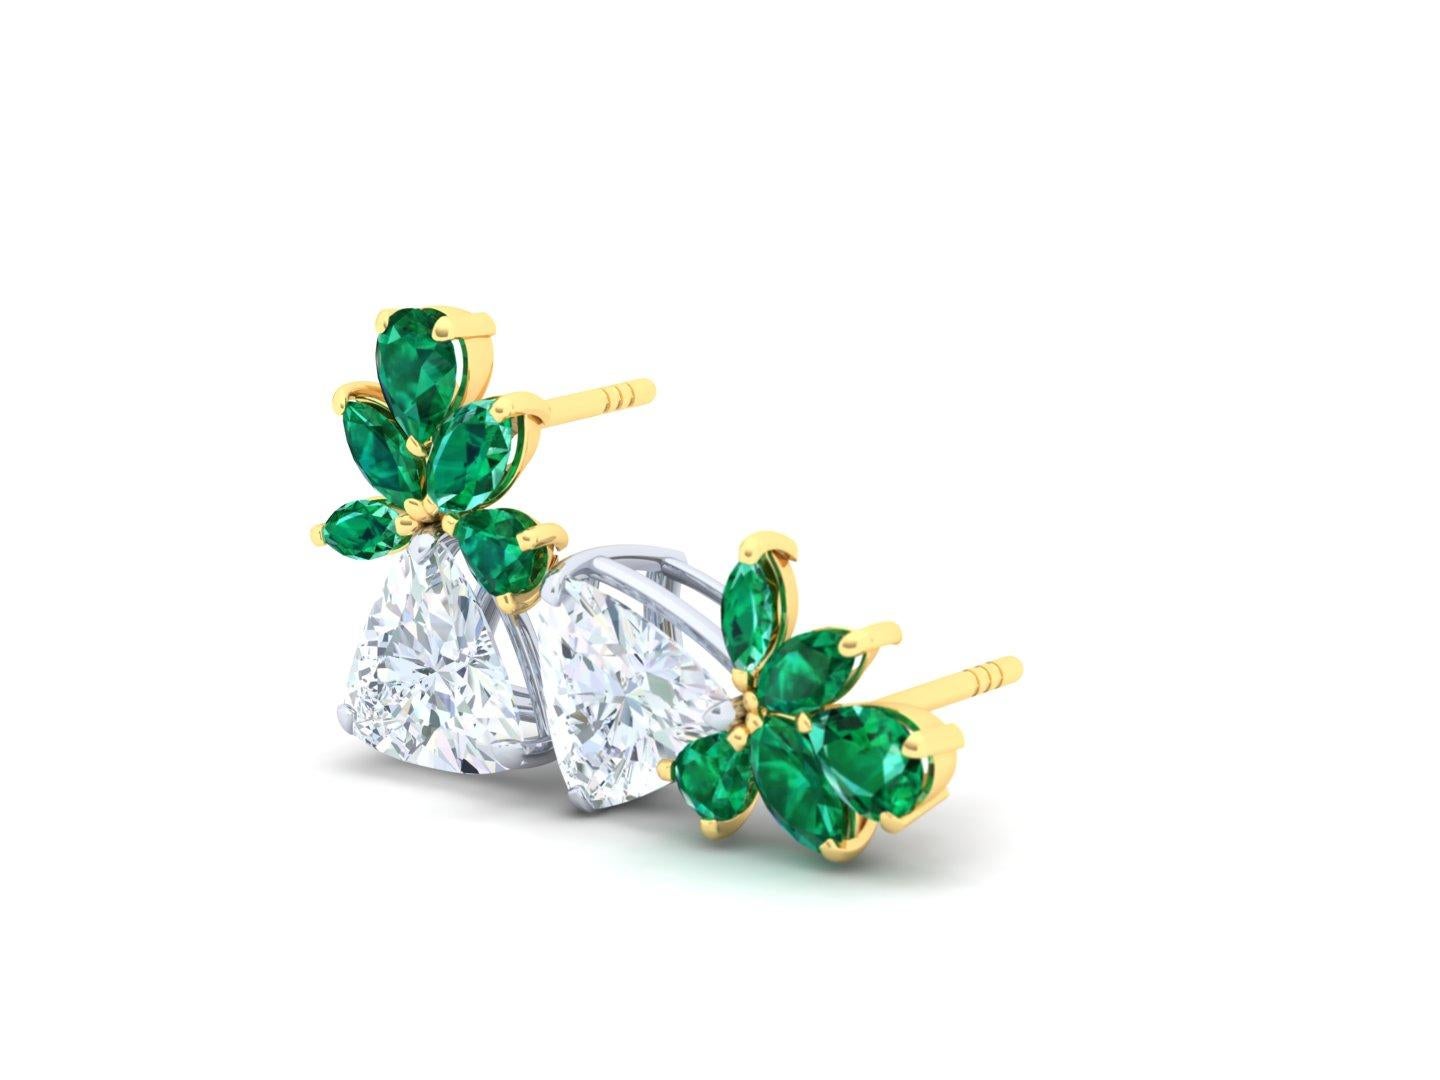 These classic styled earrings have the perfect combination of crisp white trillion cut diamonds paired with rich deep green emeralds.  The tops of these earrings are forged from 18 k yellow gold and pair with the green perfectly.  Below the green